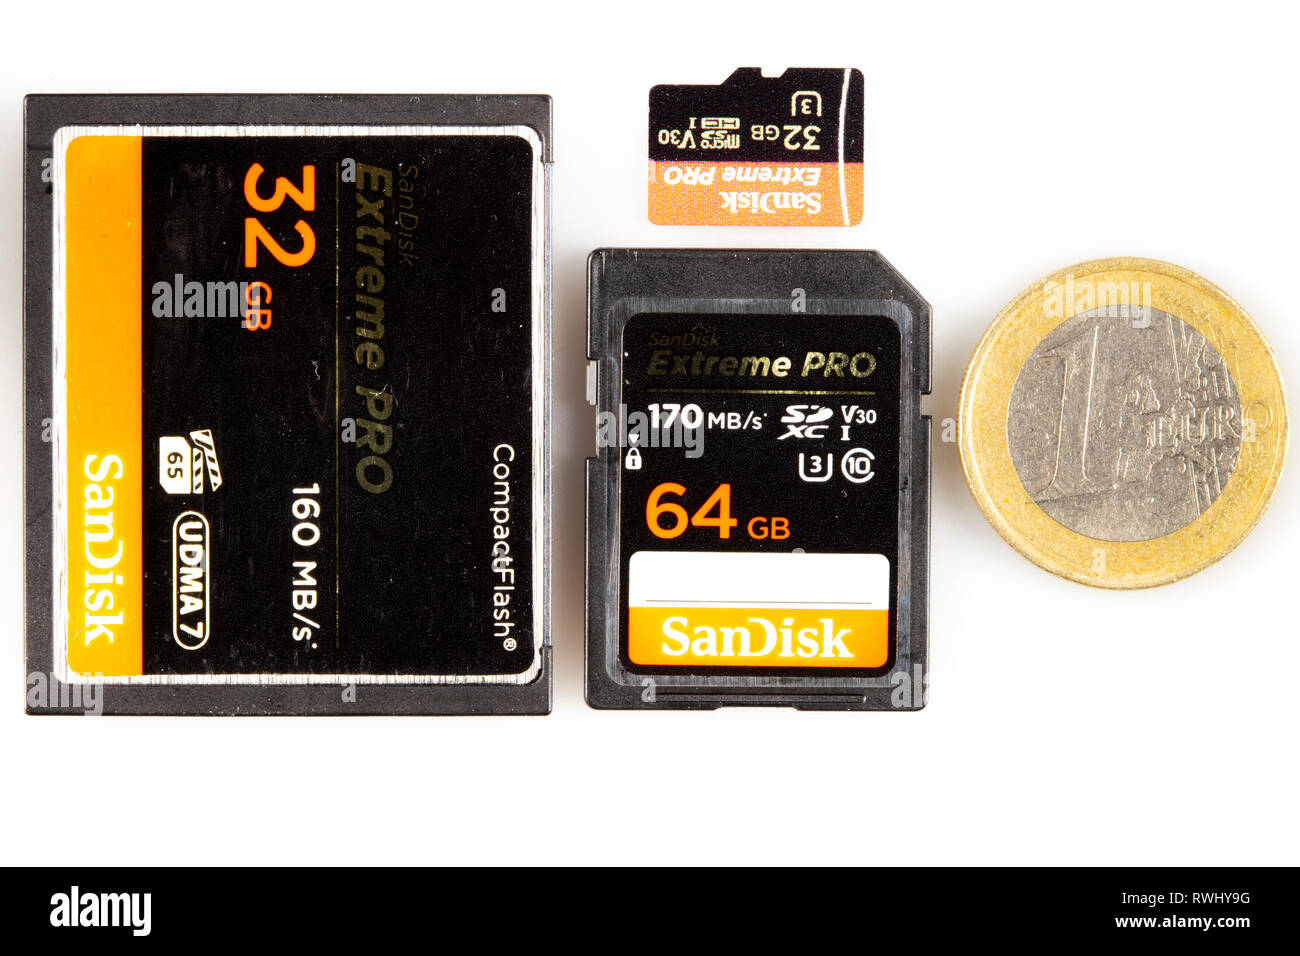 Memory Cards For Digital Cameras Compactflash Card Sd Card Micro Sd Card Size Comparison Coin Stock Photo Alamy